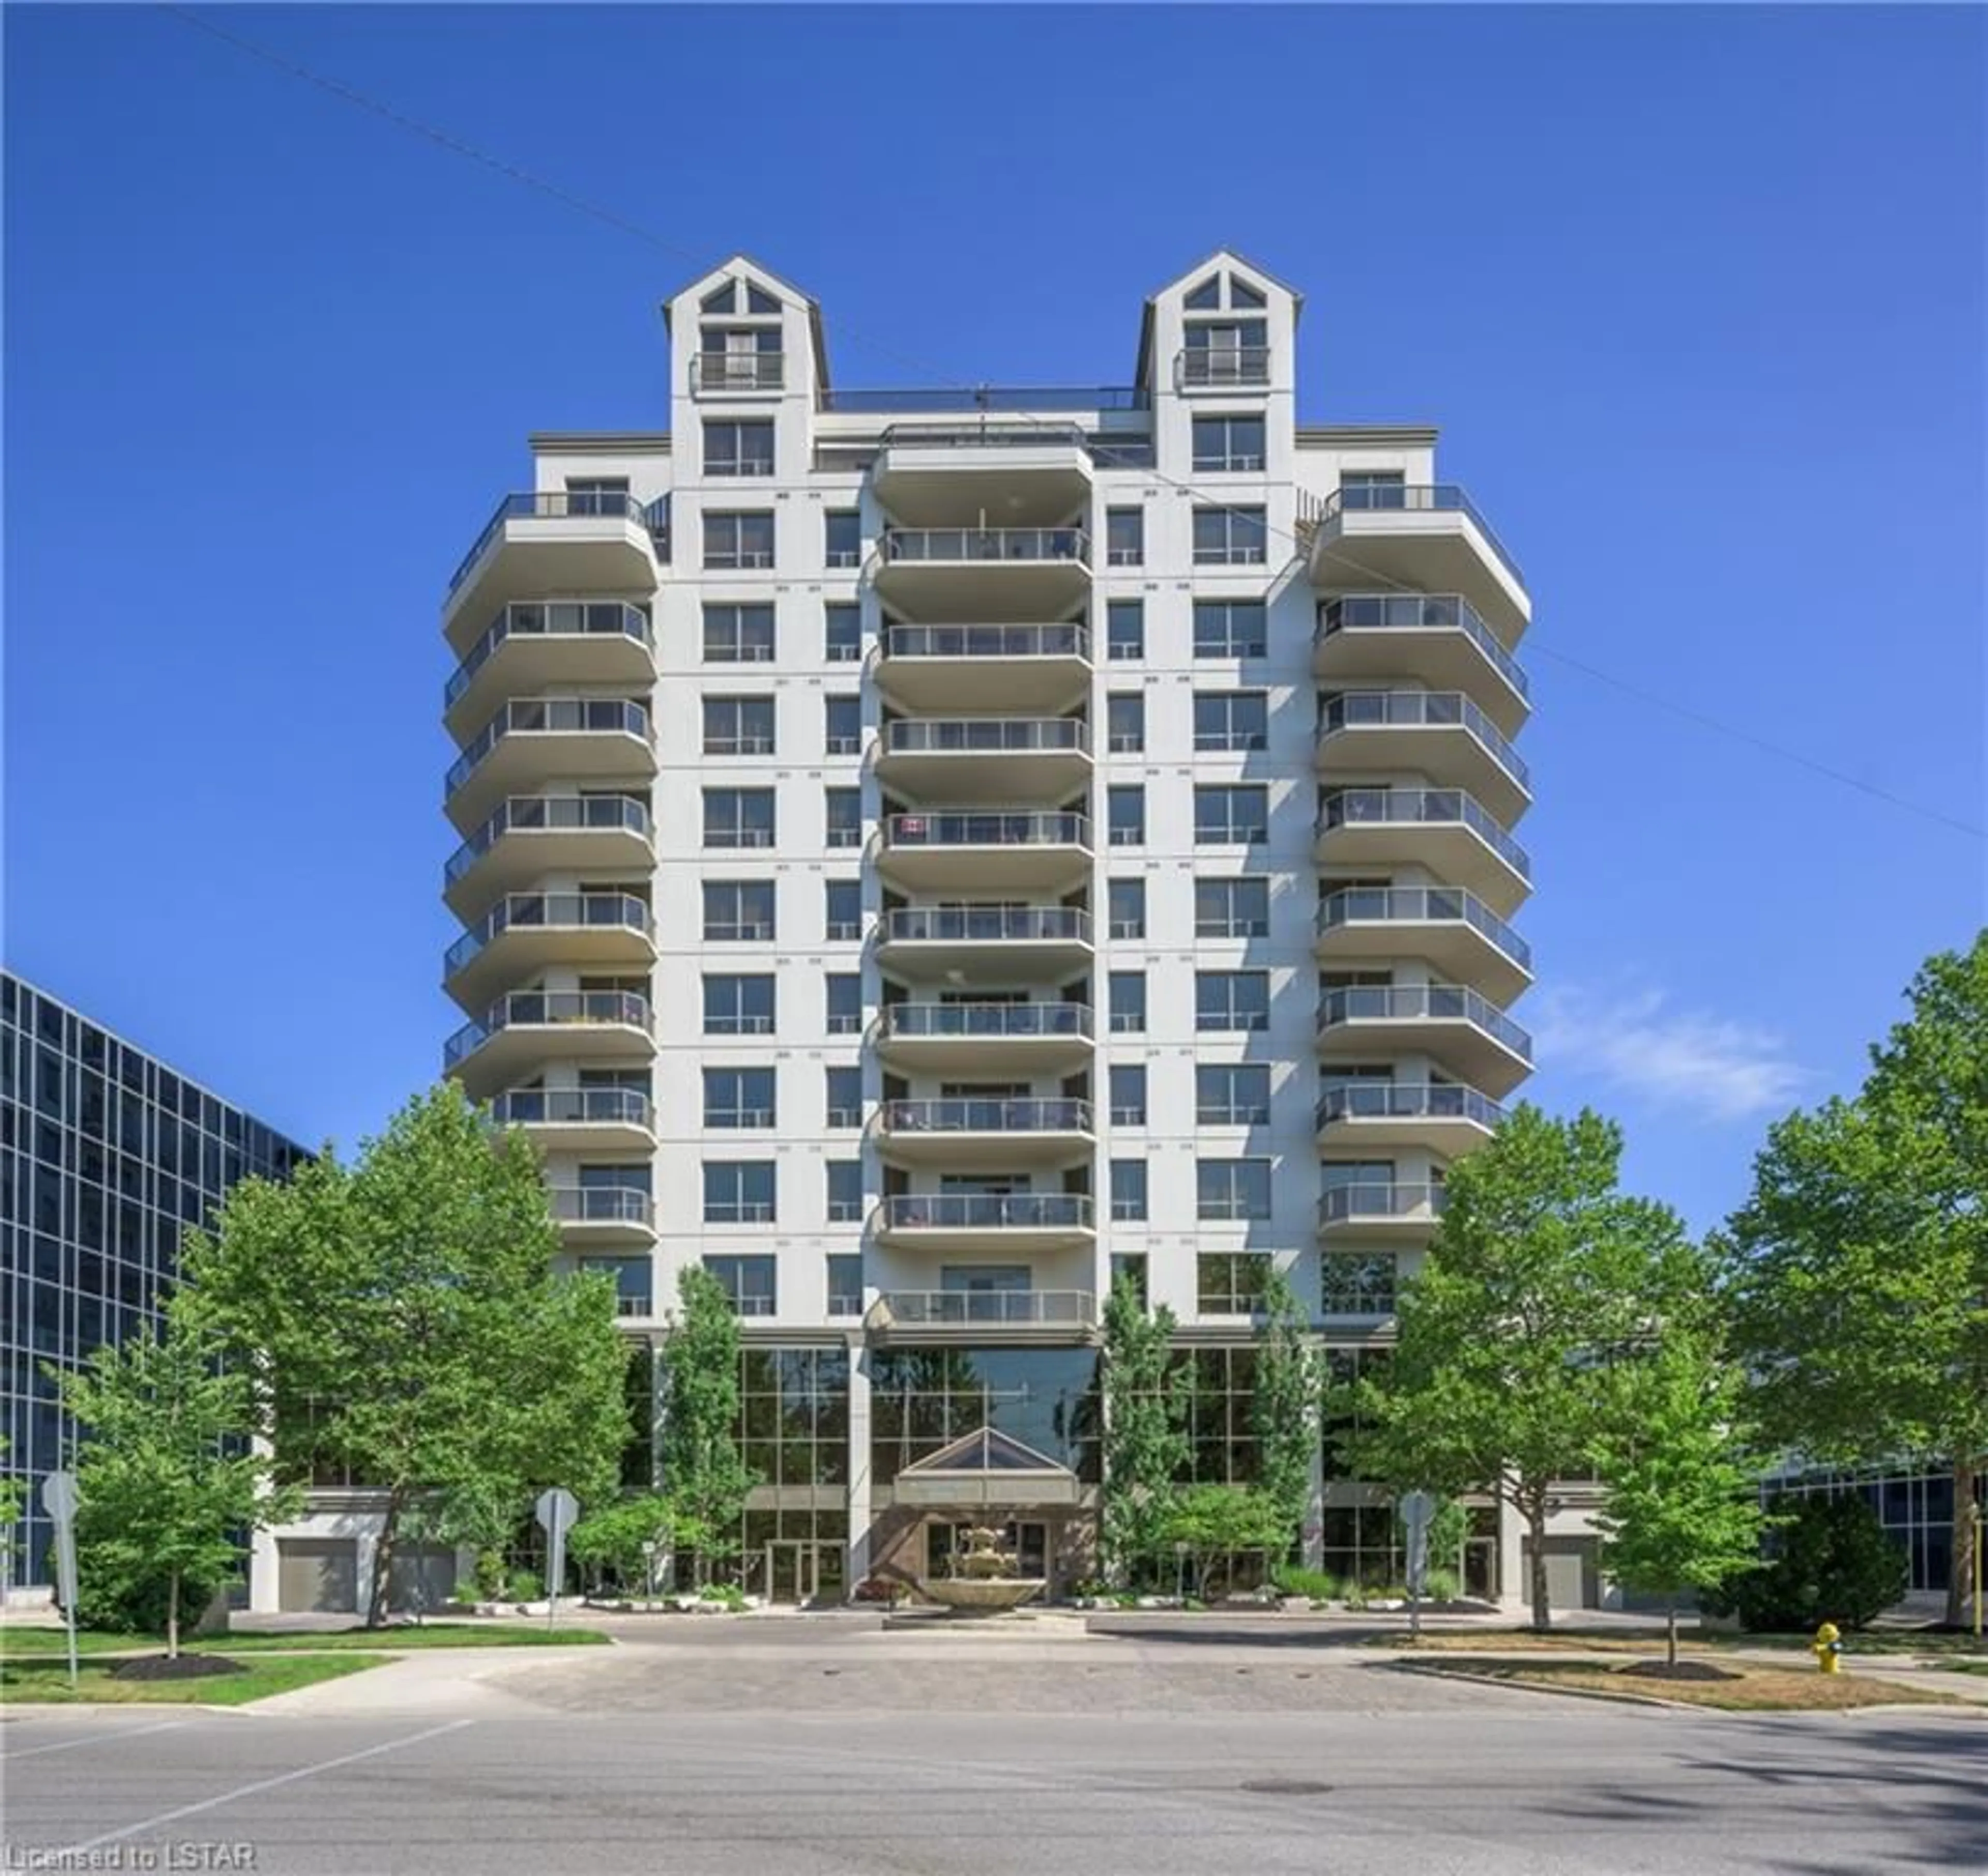 A pic from exterior of the house or condo for 250 Pall Mall St #801, London Ontario N6A 6K3